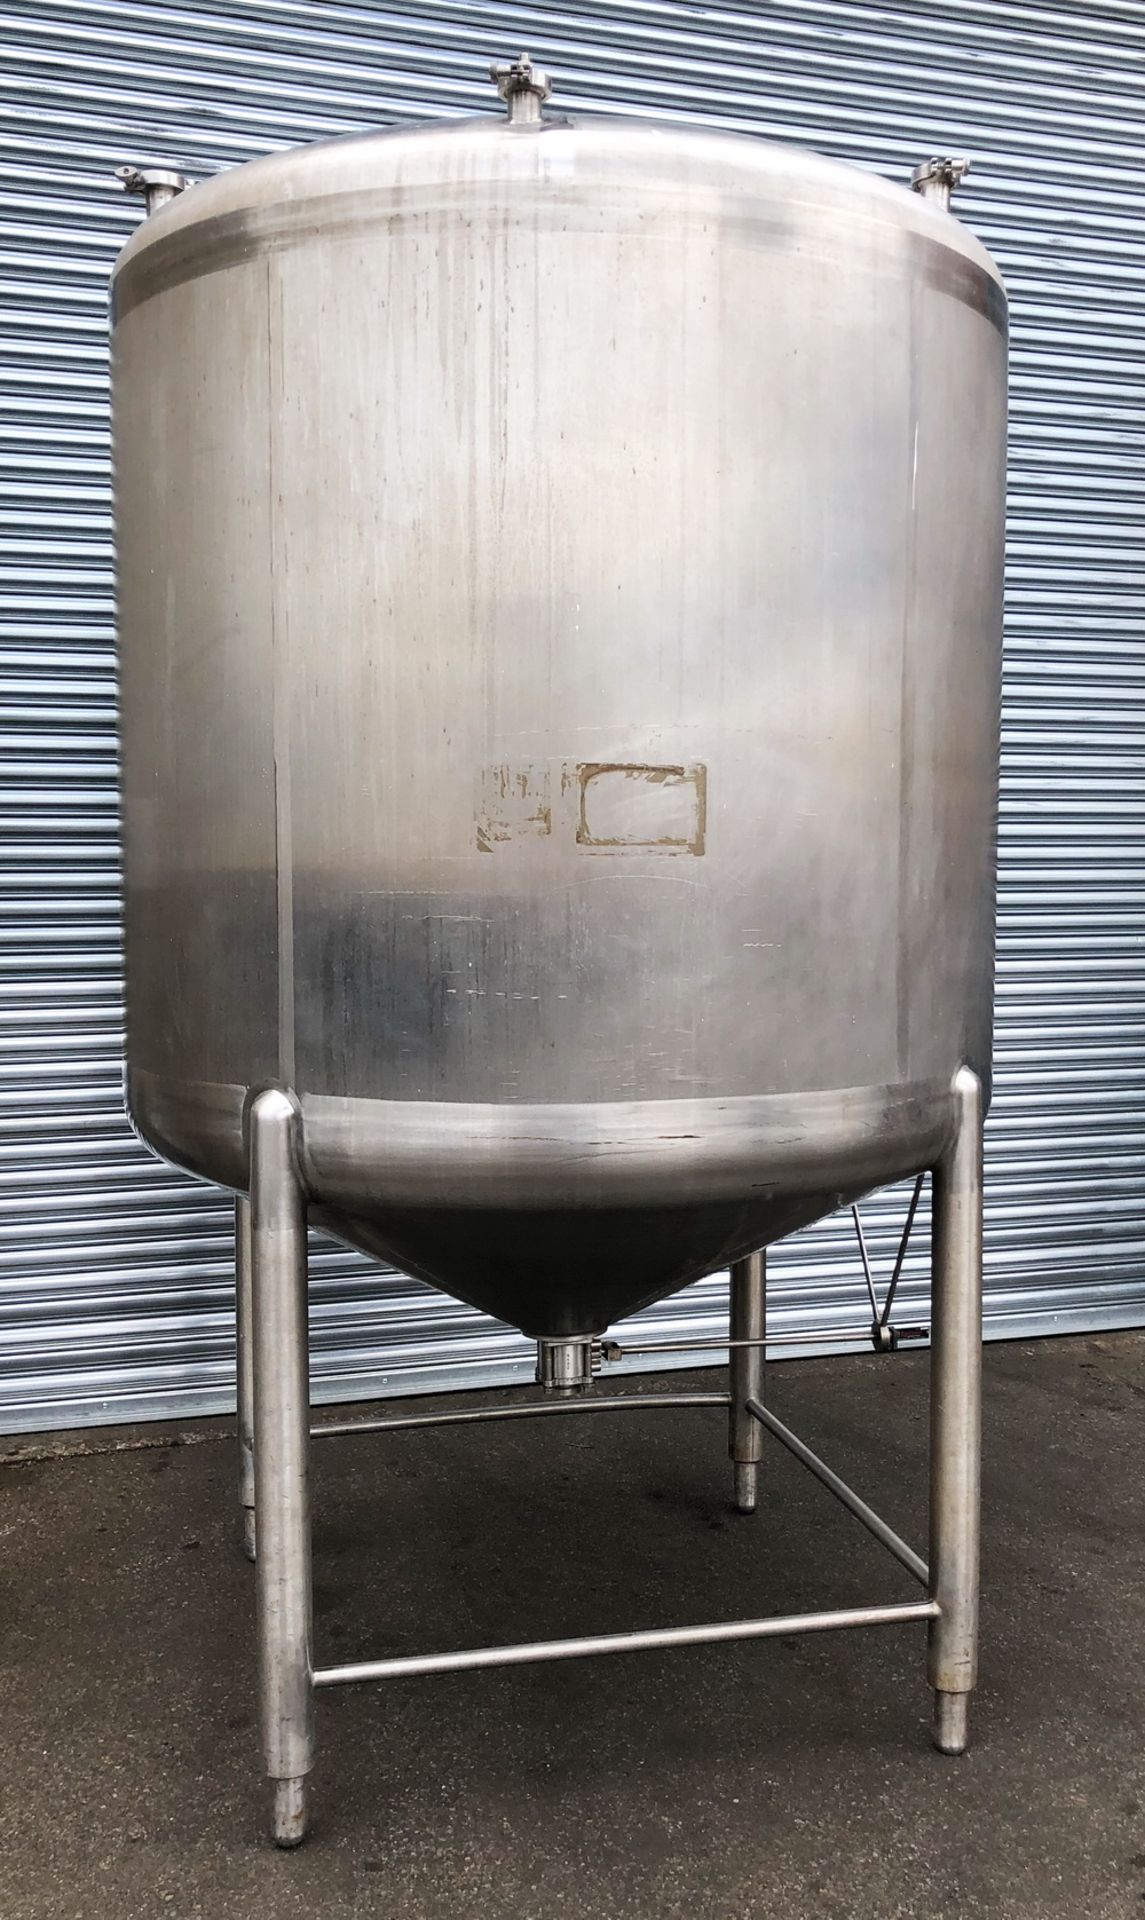 1,000 gallon Stainless Steel Single Wall Tank - Image 3 of 10